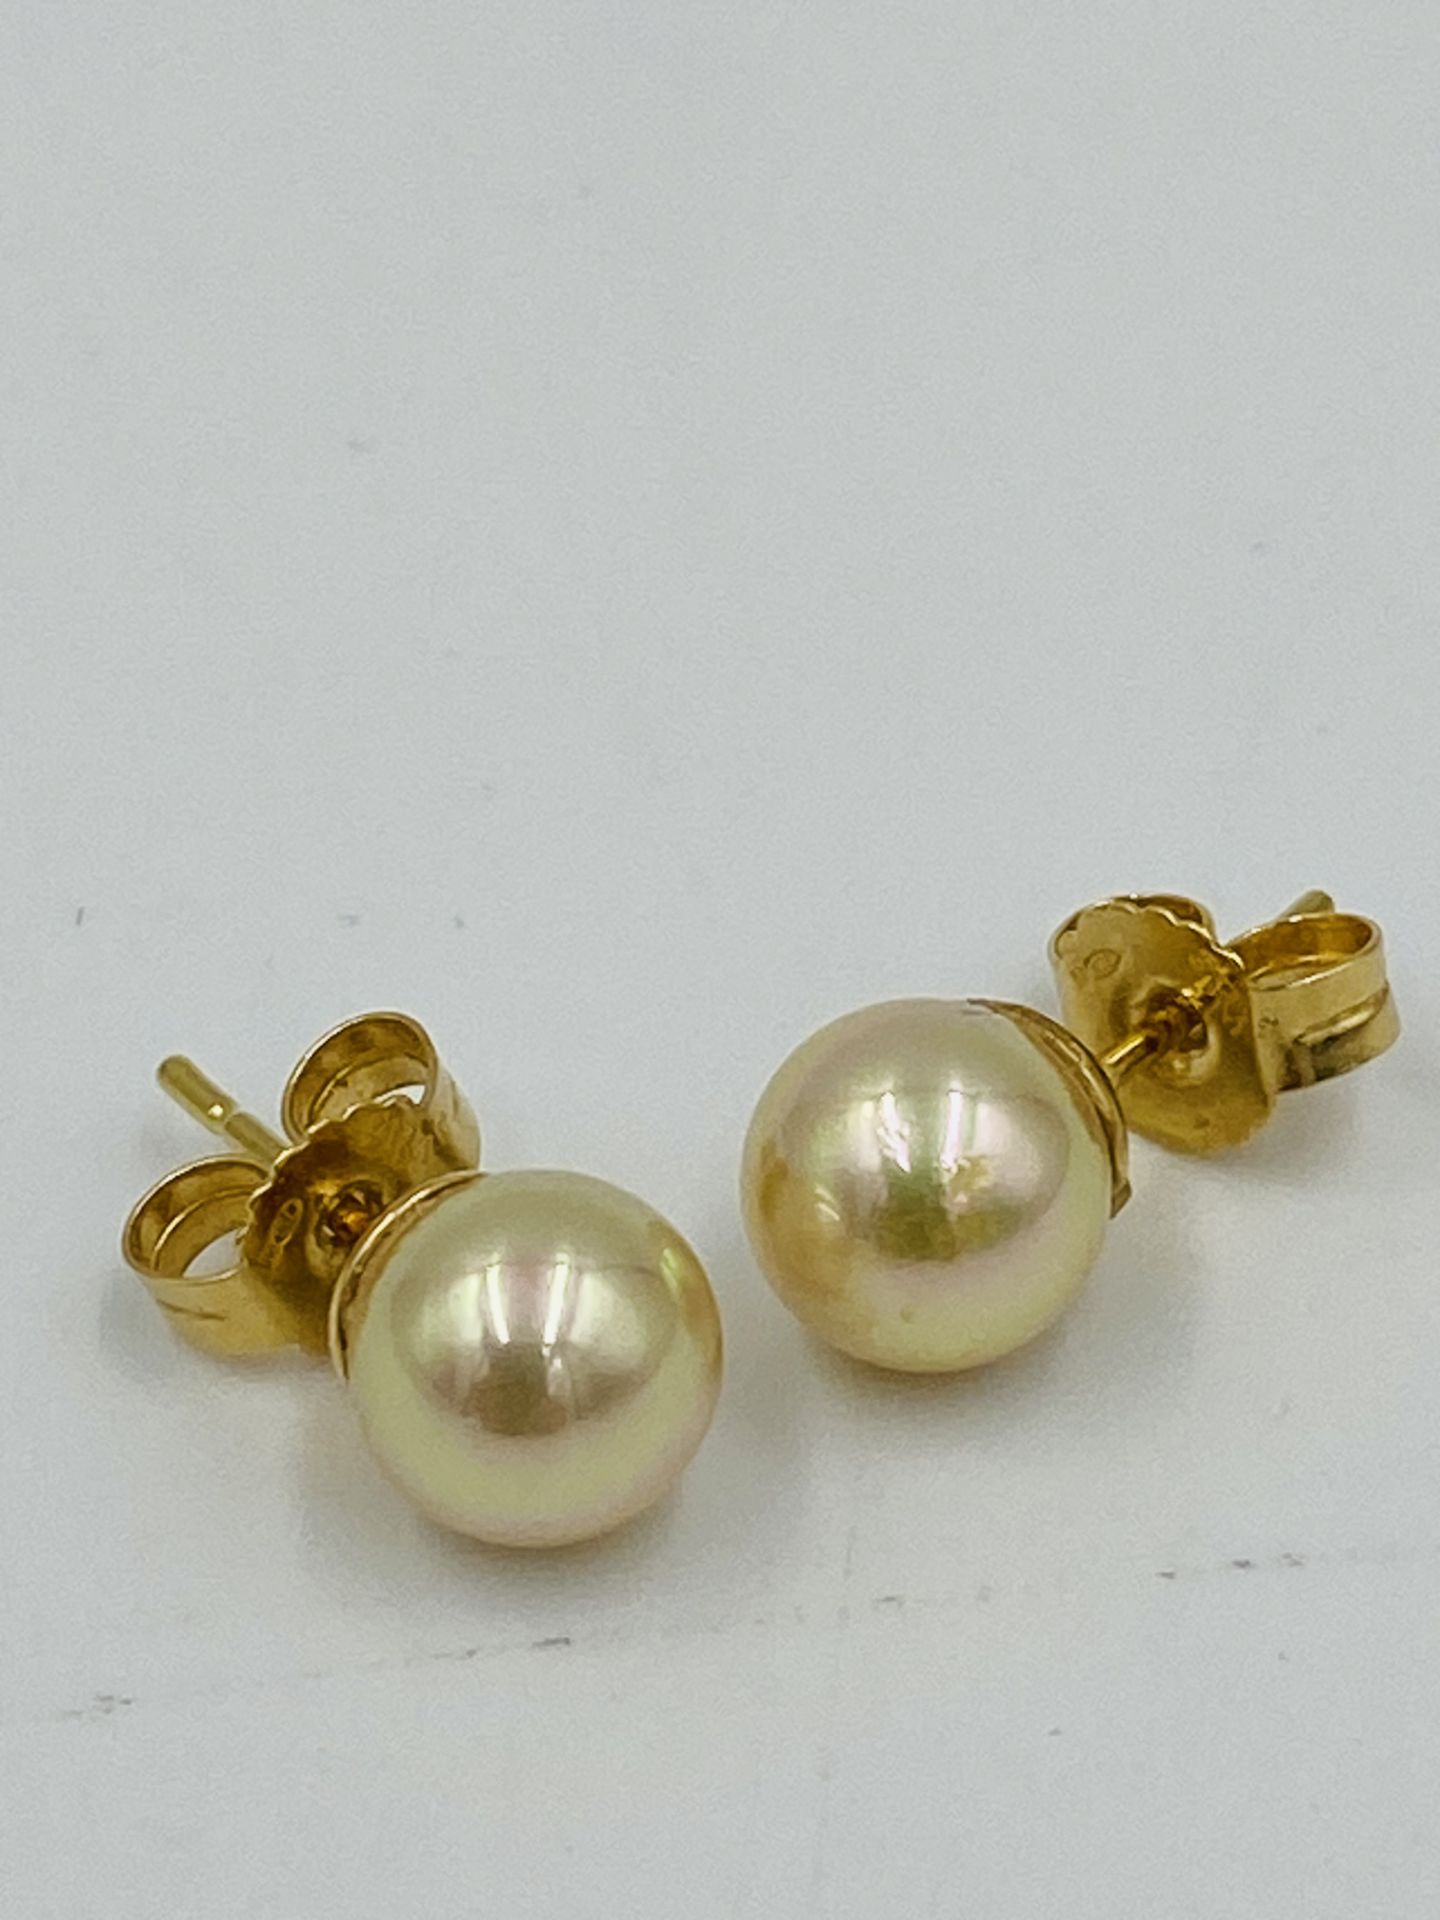 Pair of 18ct gold earrings set with a pearl - Image 4 of 4